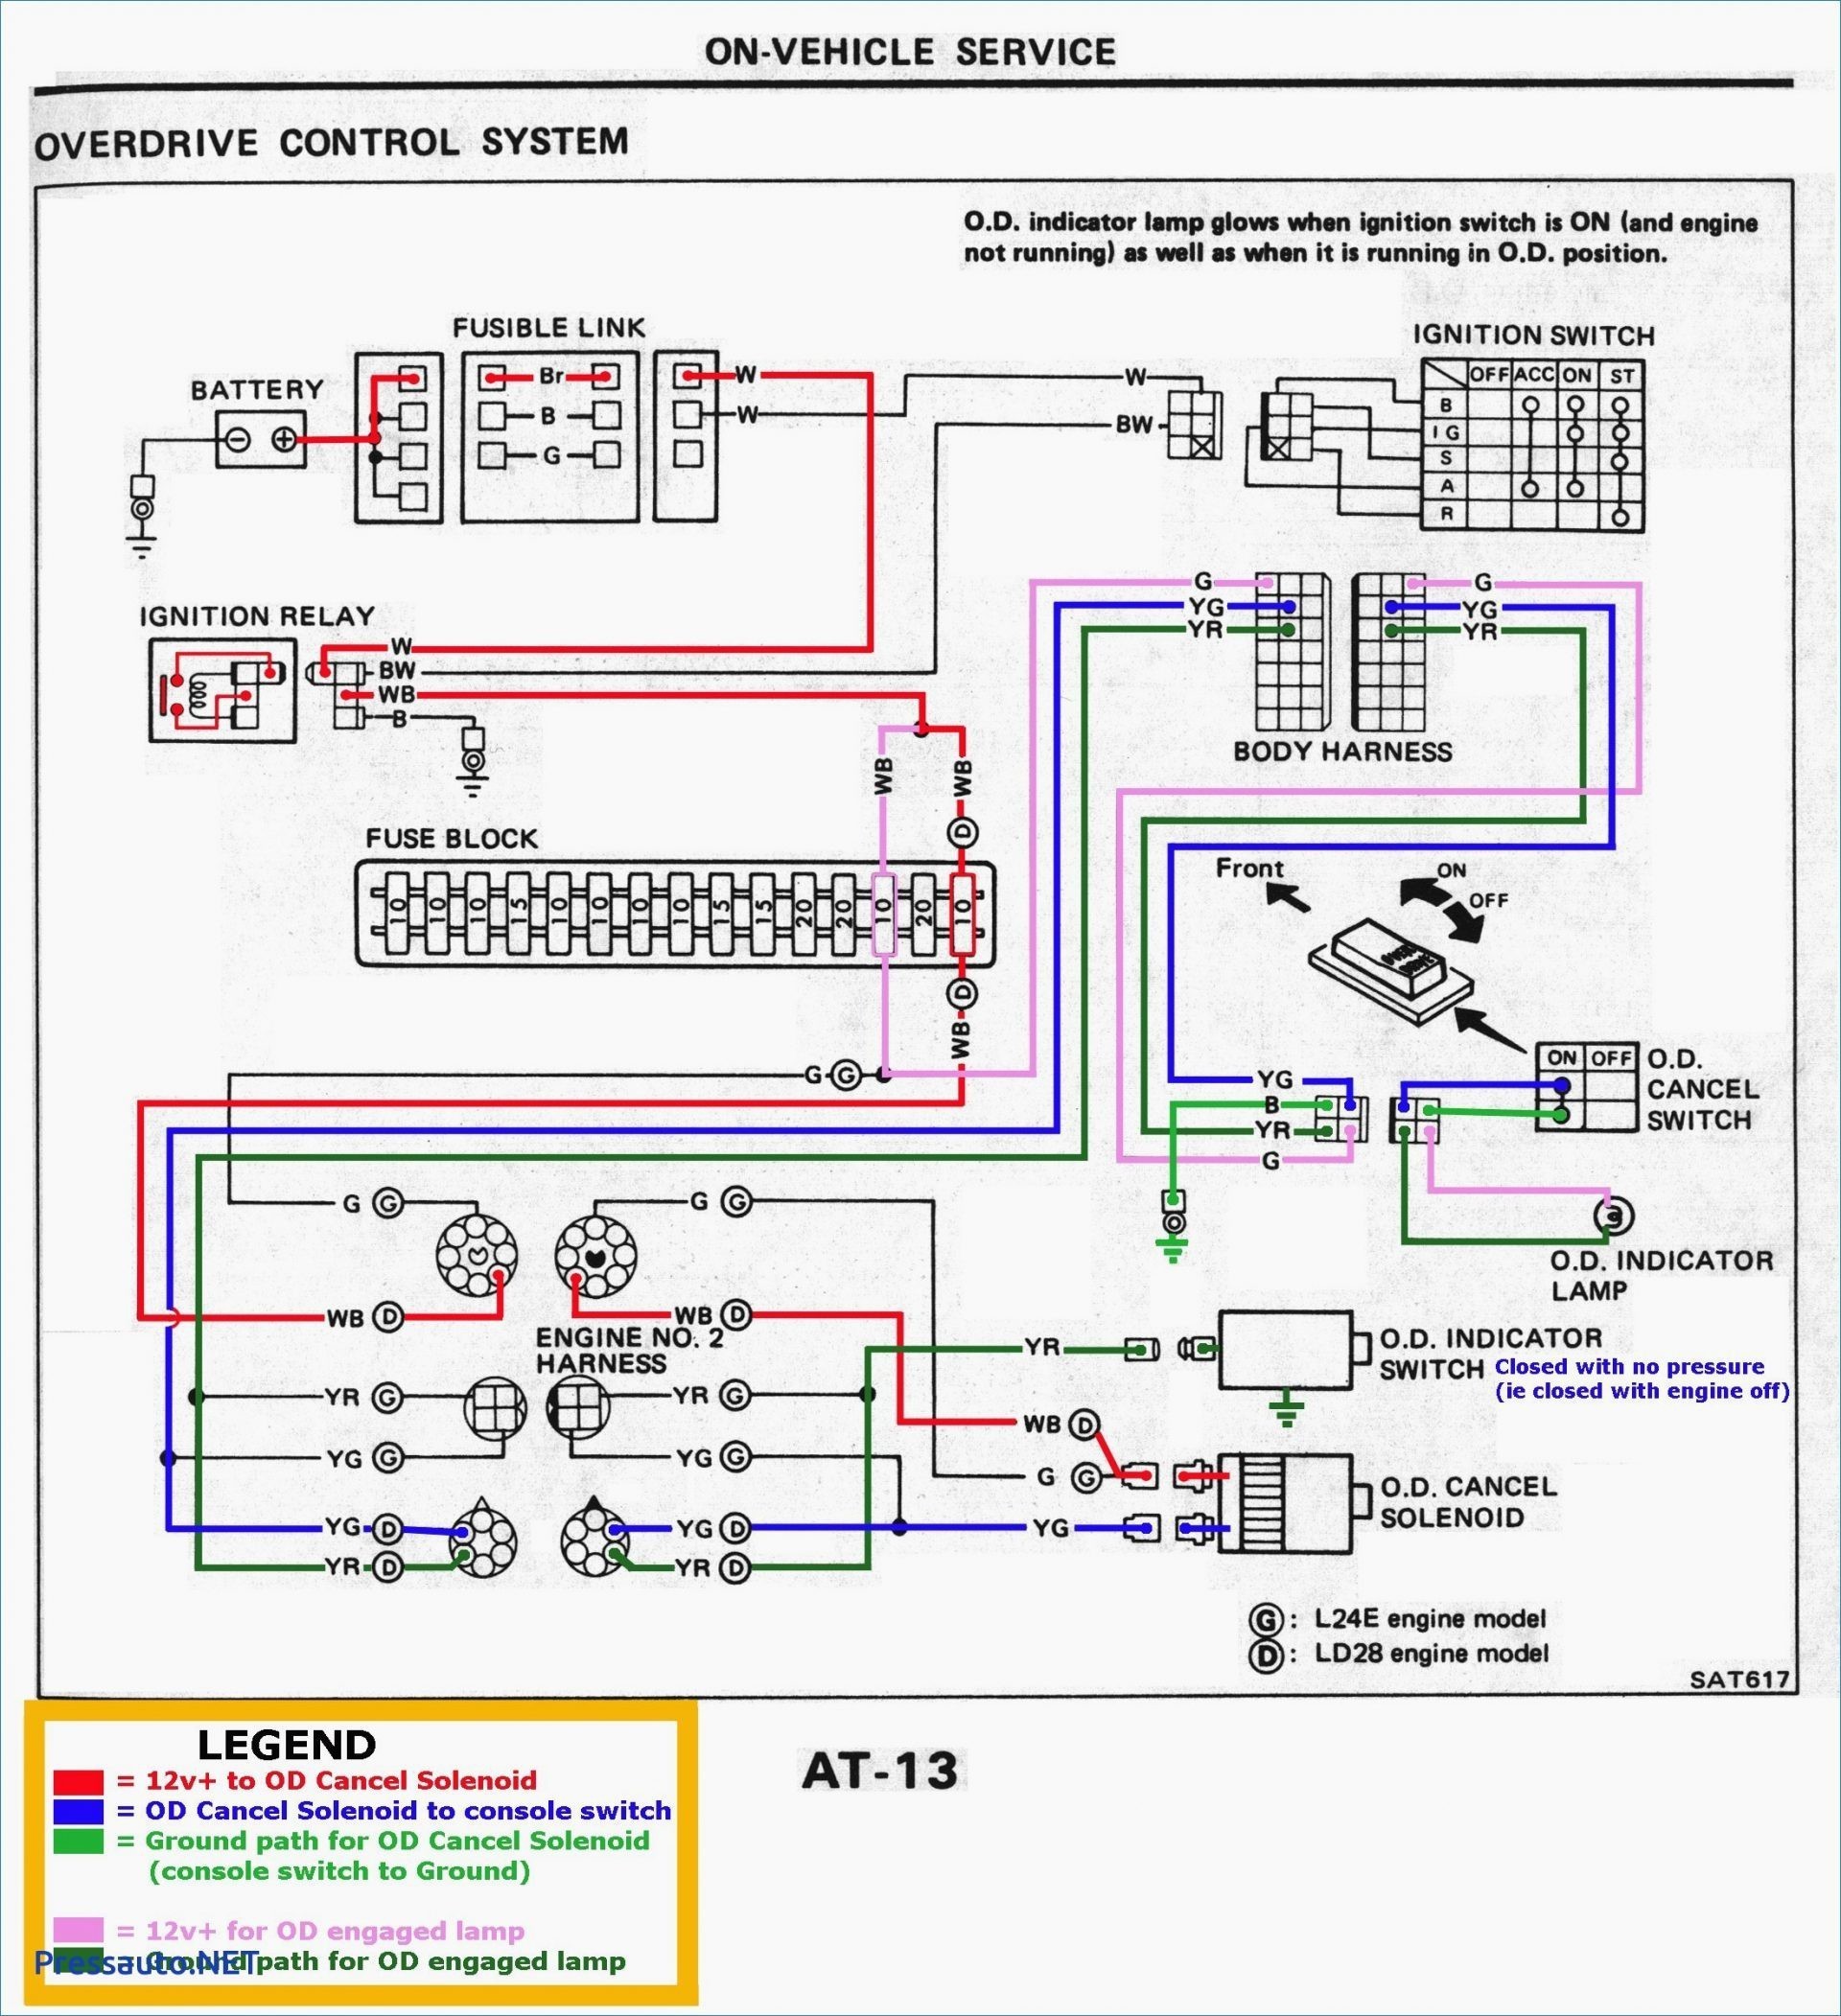 Ford F250 Tail Light Wiring Colors â¦diagram Basedâ¦ Chevy Truck Tail Light Wiring Diagram Of Ford F250 Tail Light Wiring Colors